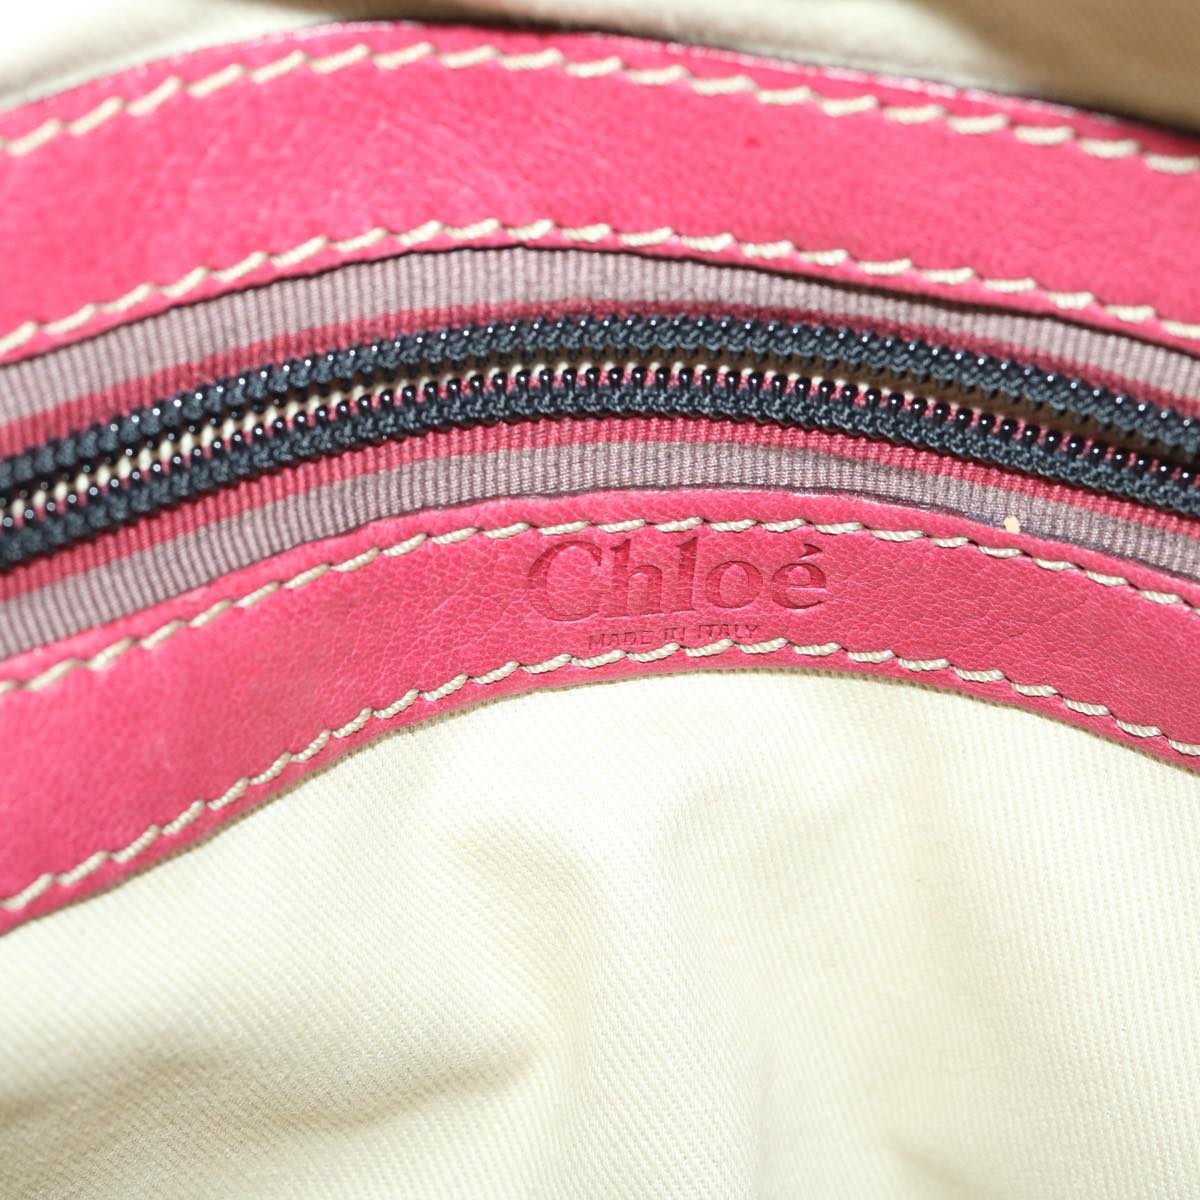 Chloe Hand Bag Leather Pink Auth bs12851